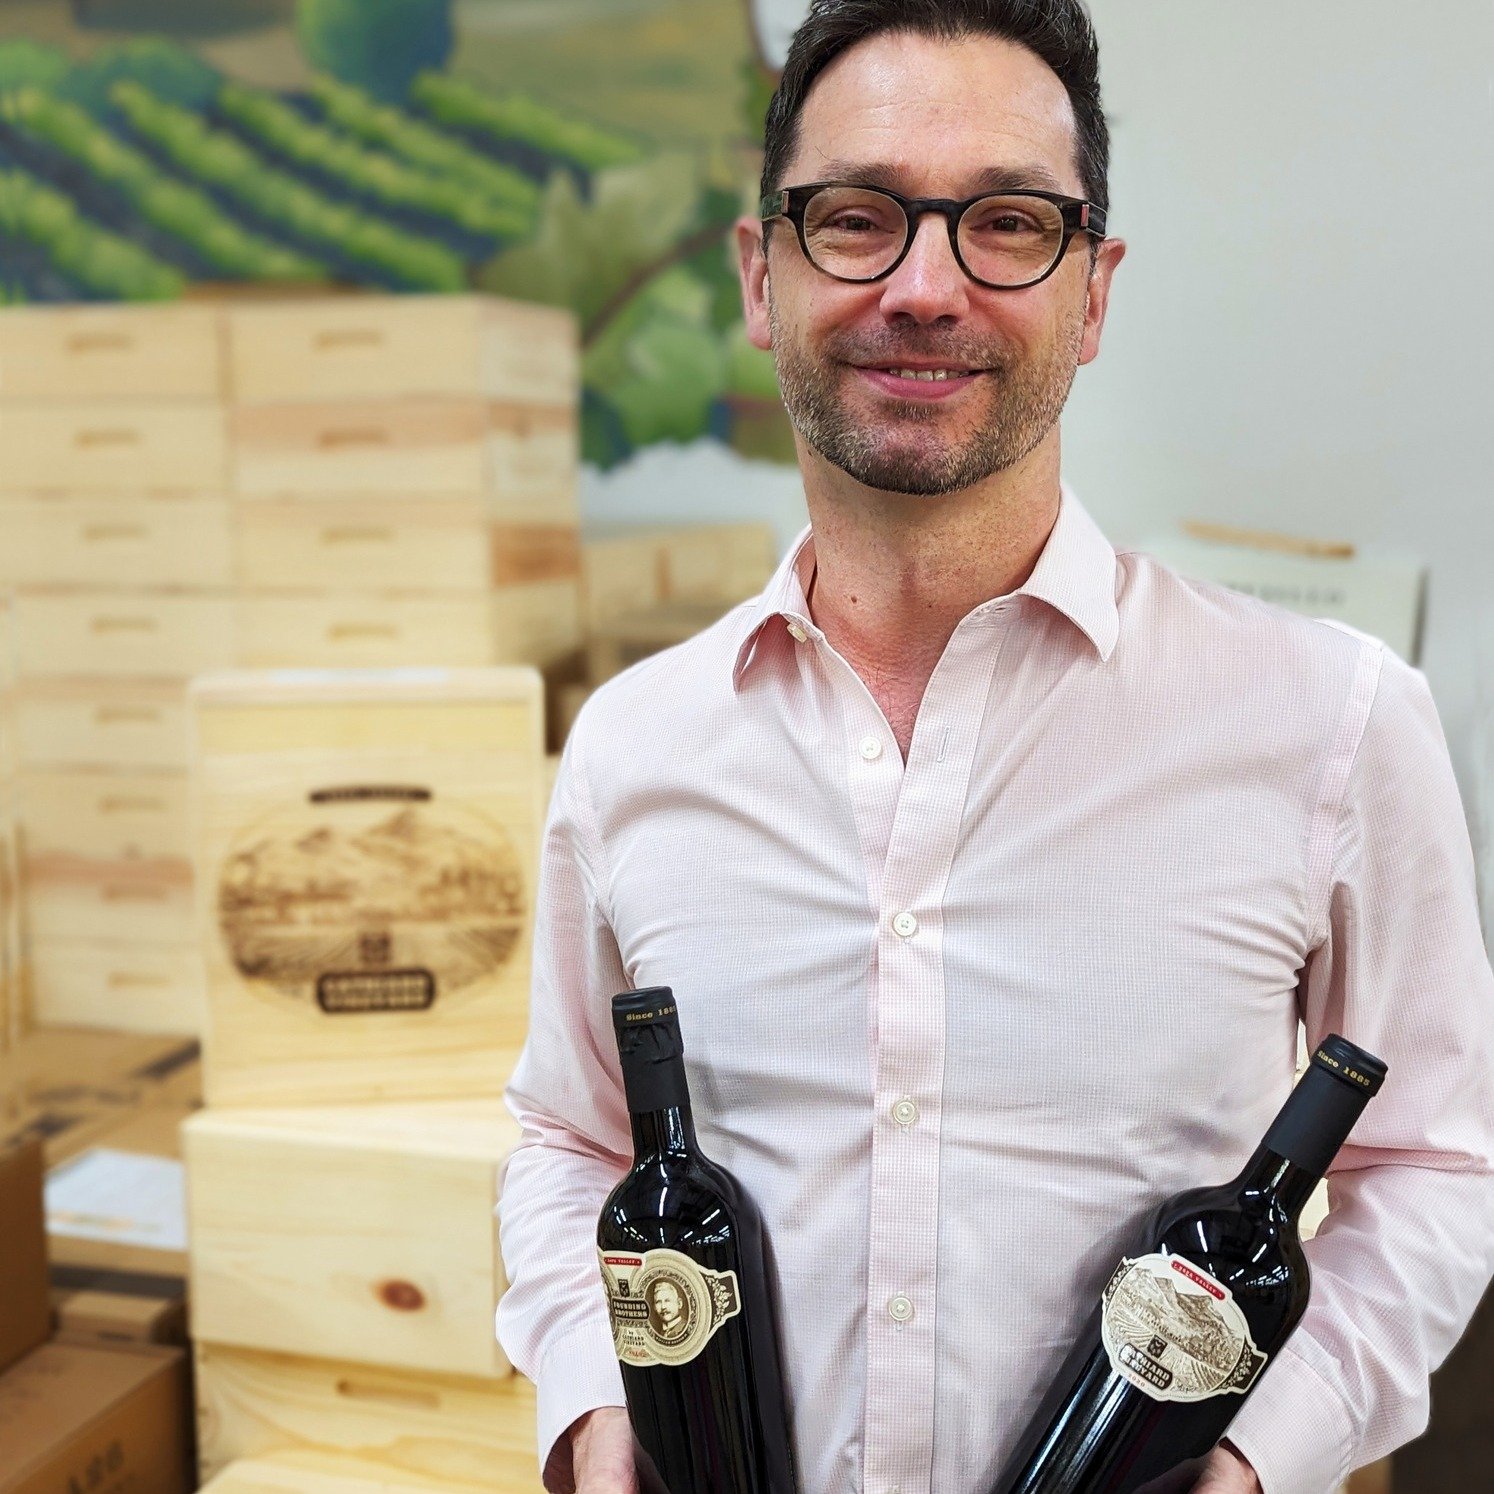 A warm welcome to Claude Rouquet, National Sales Director for Cathiard Vineyard in Napa Valley, who joined us for a tasting at MISA HQ today! We are very thankful to Claude for speaking with us and revealing the history behind the vineyard and the de